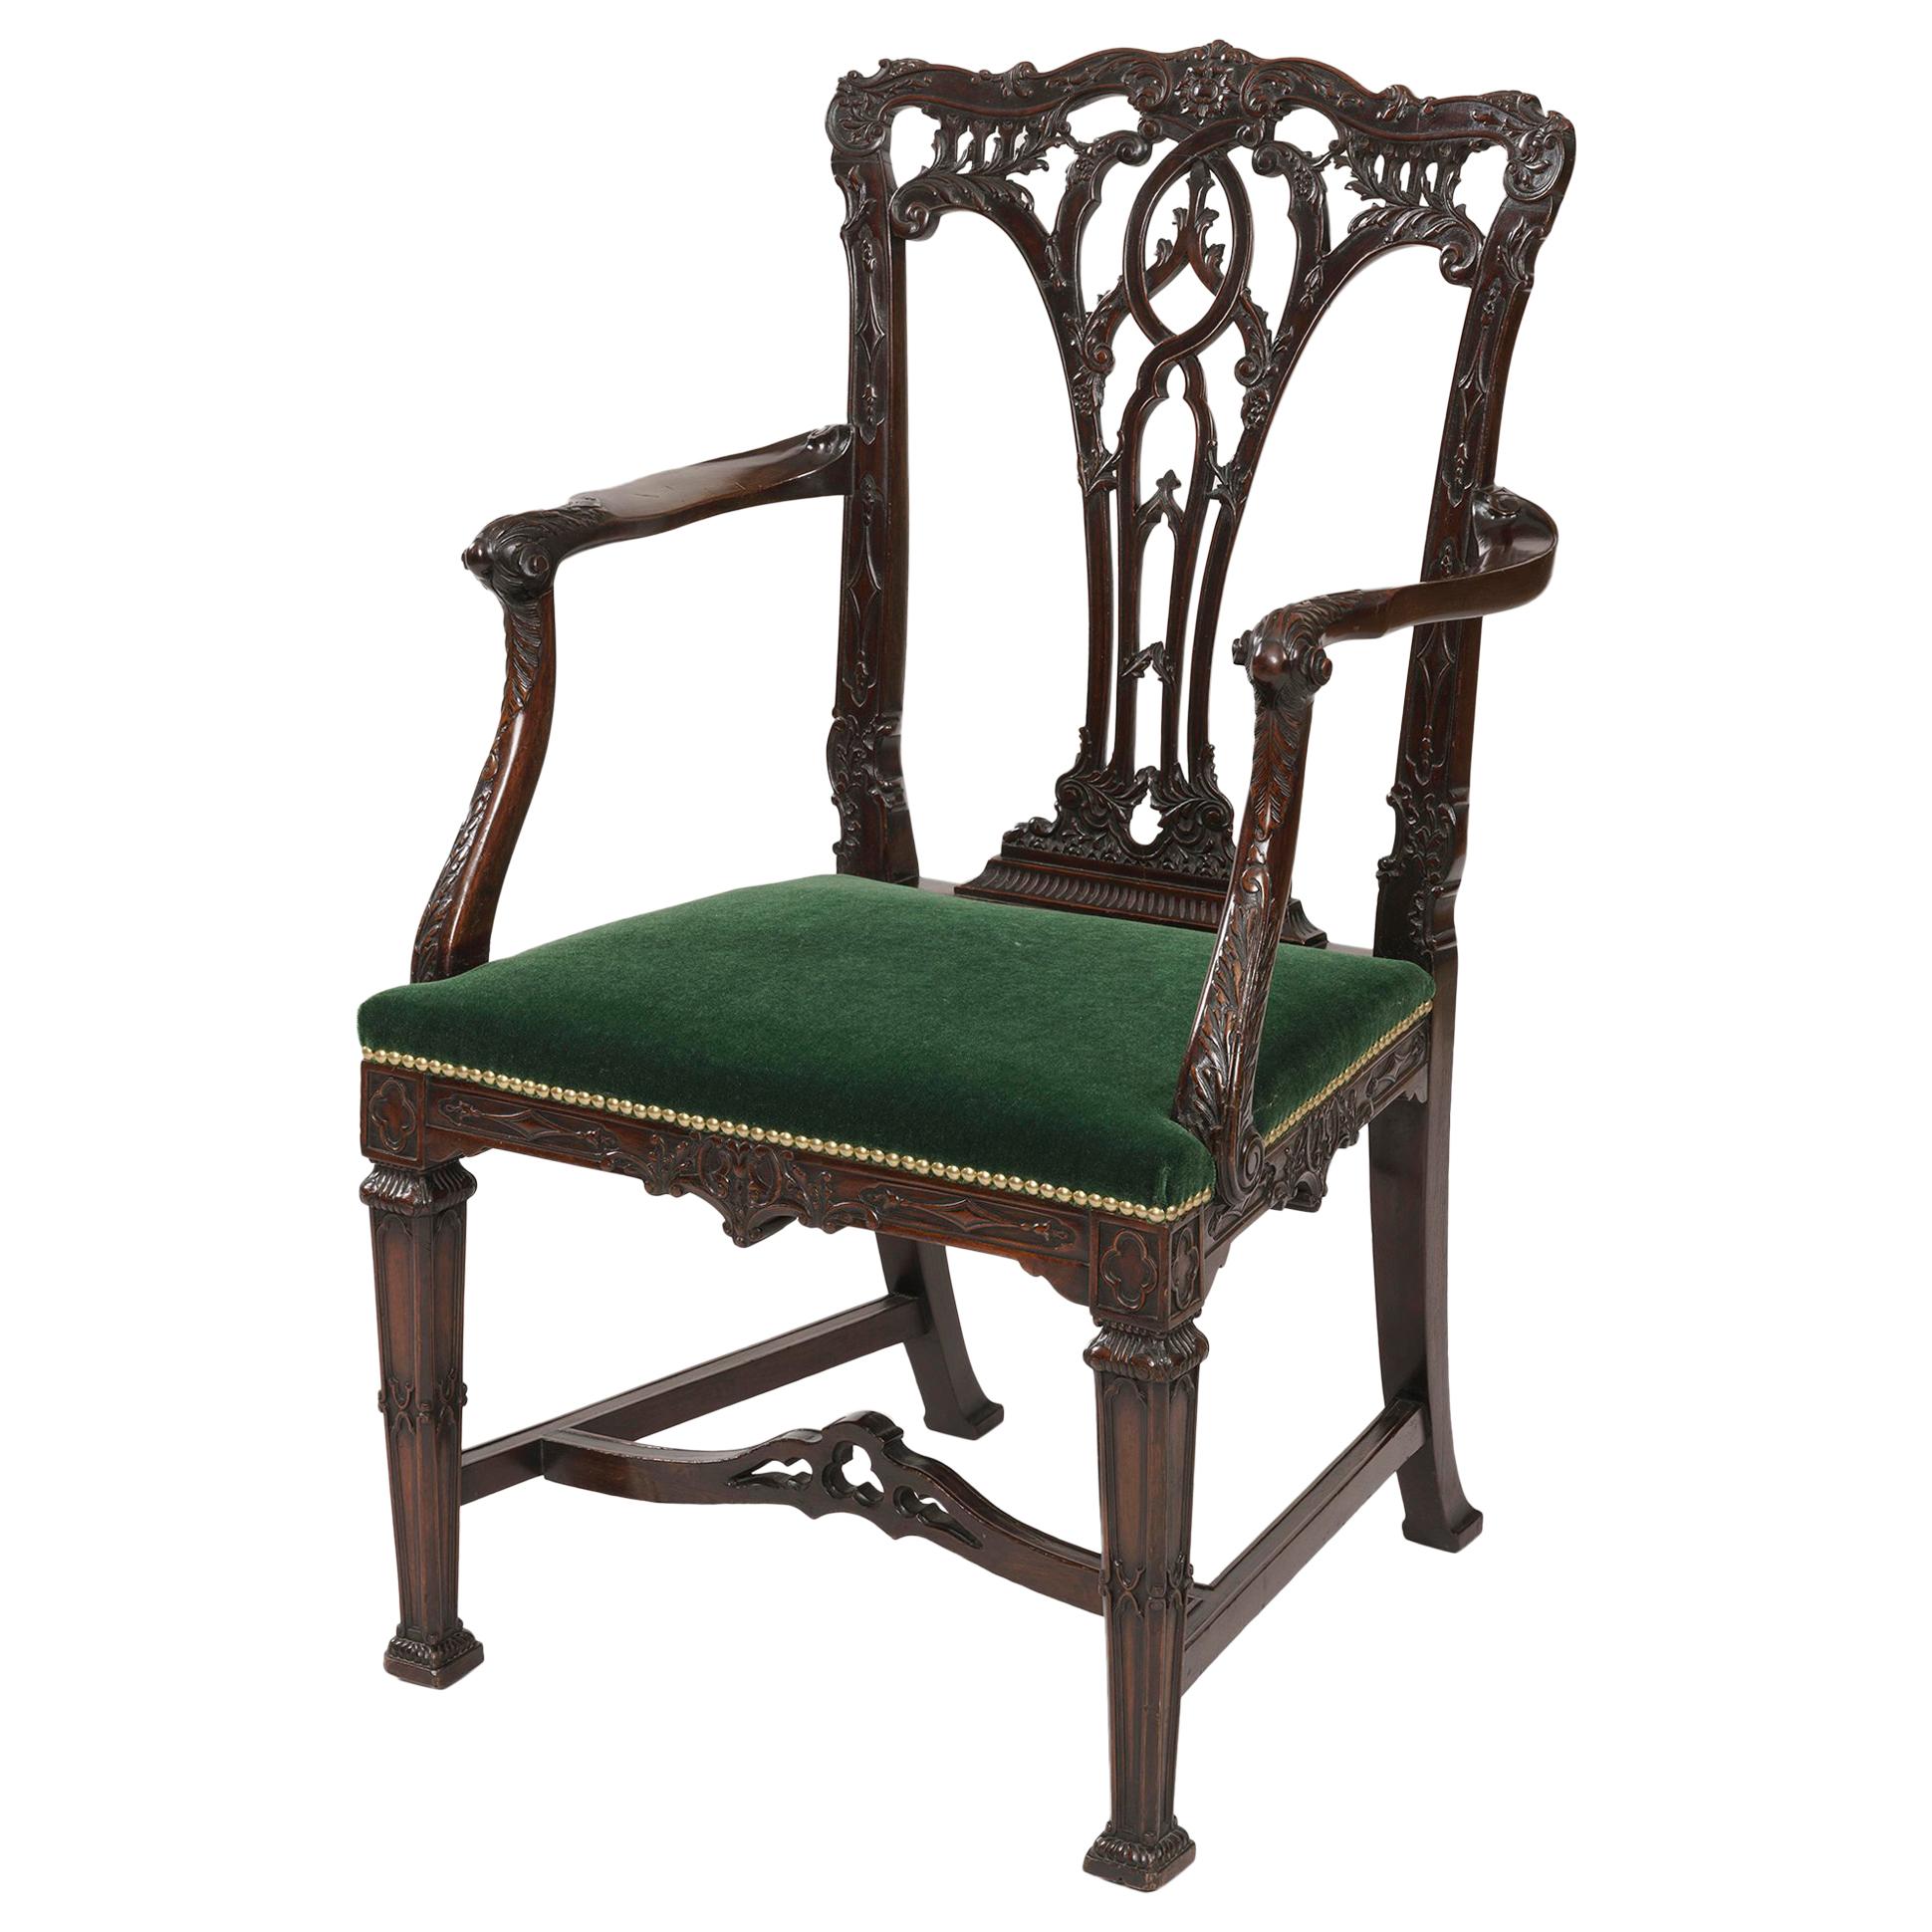 19th Century Mahogany Armchair in the style of Chippendale with Green upholstery